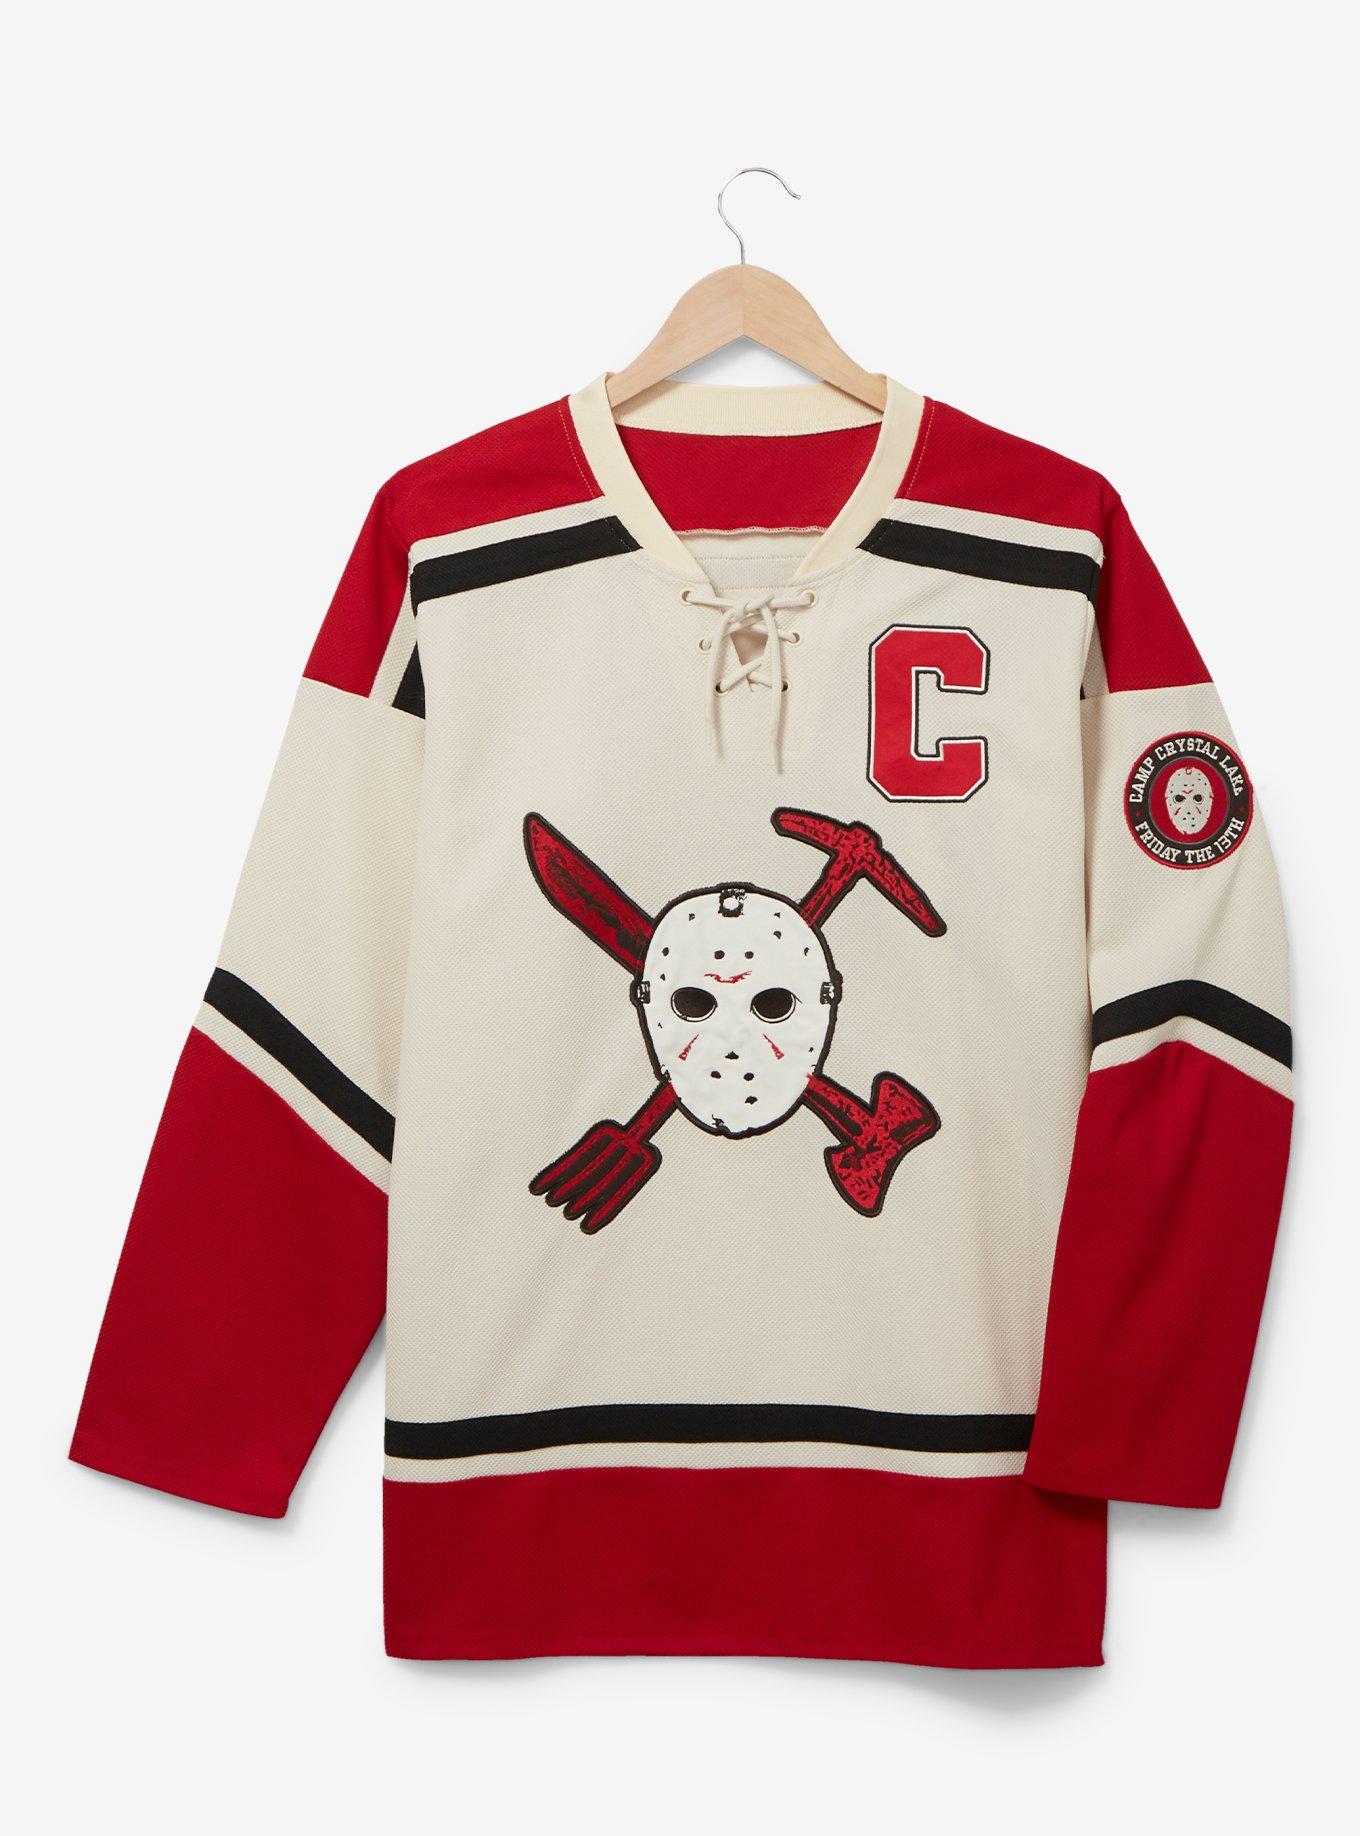 Time to Lace Up the Skates Recycled Vintage Hockey League Team